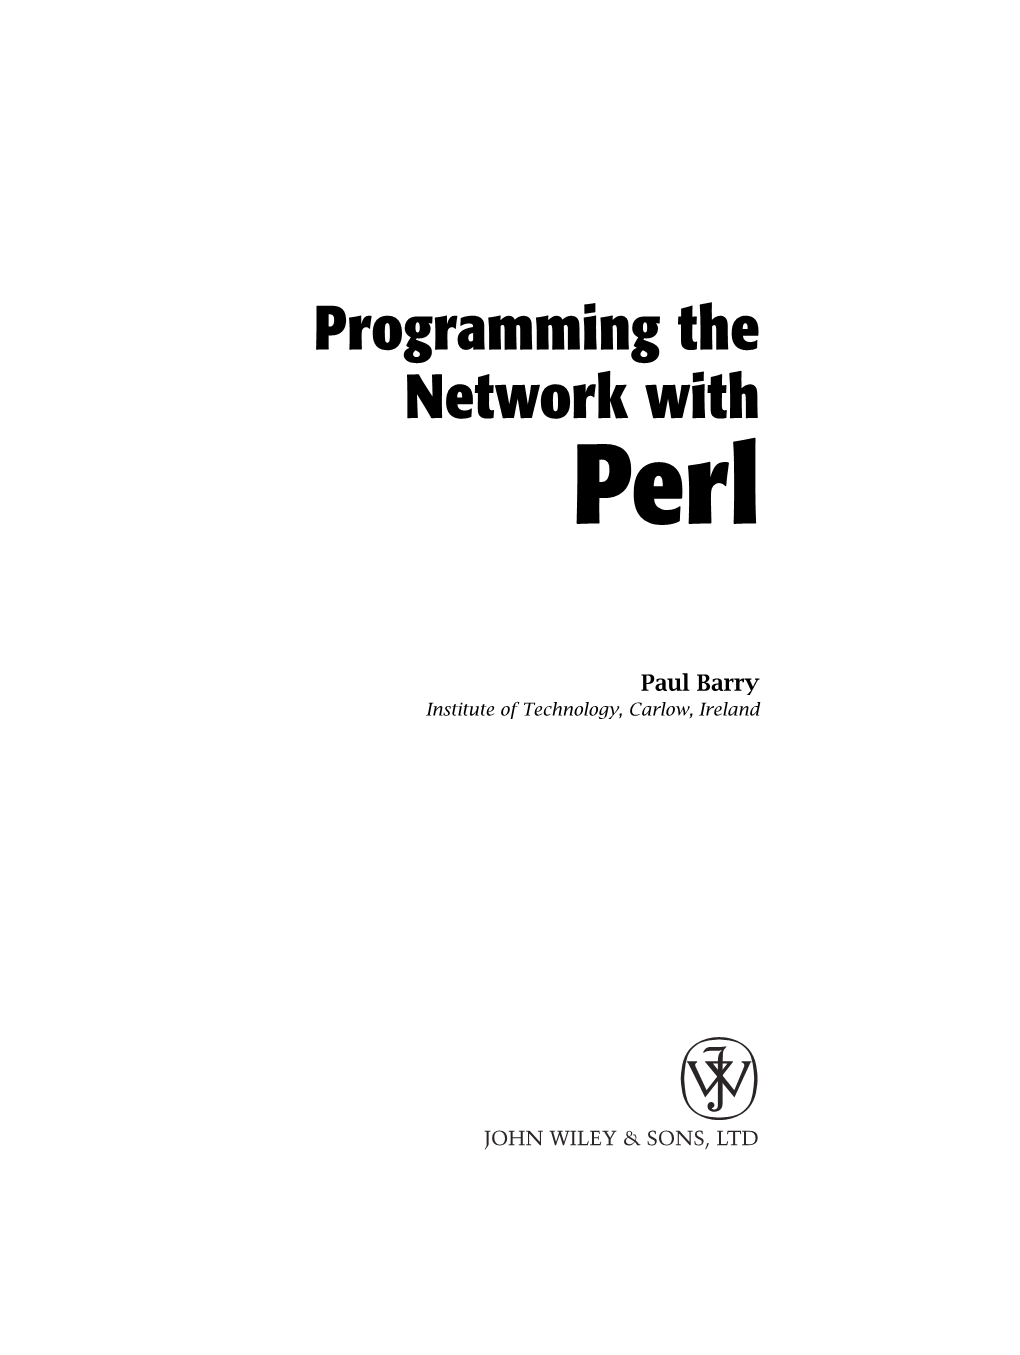 Programming the Network with Perl Concludes with Chapter 6, Mobile Agents, Which Explores an Area of Computer Networking That Is Generating Considerable Research